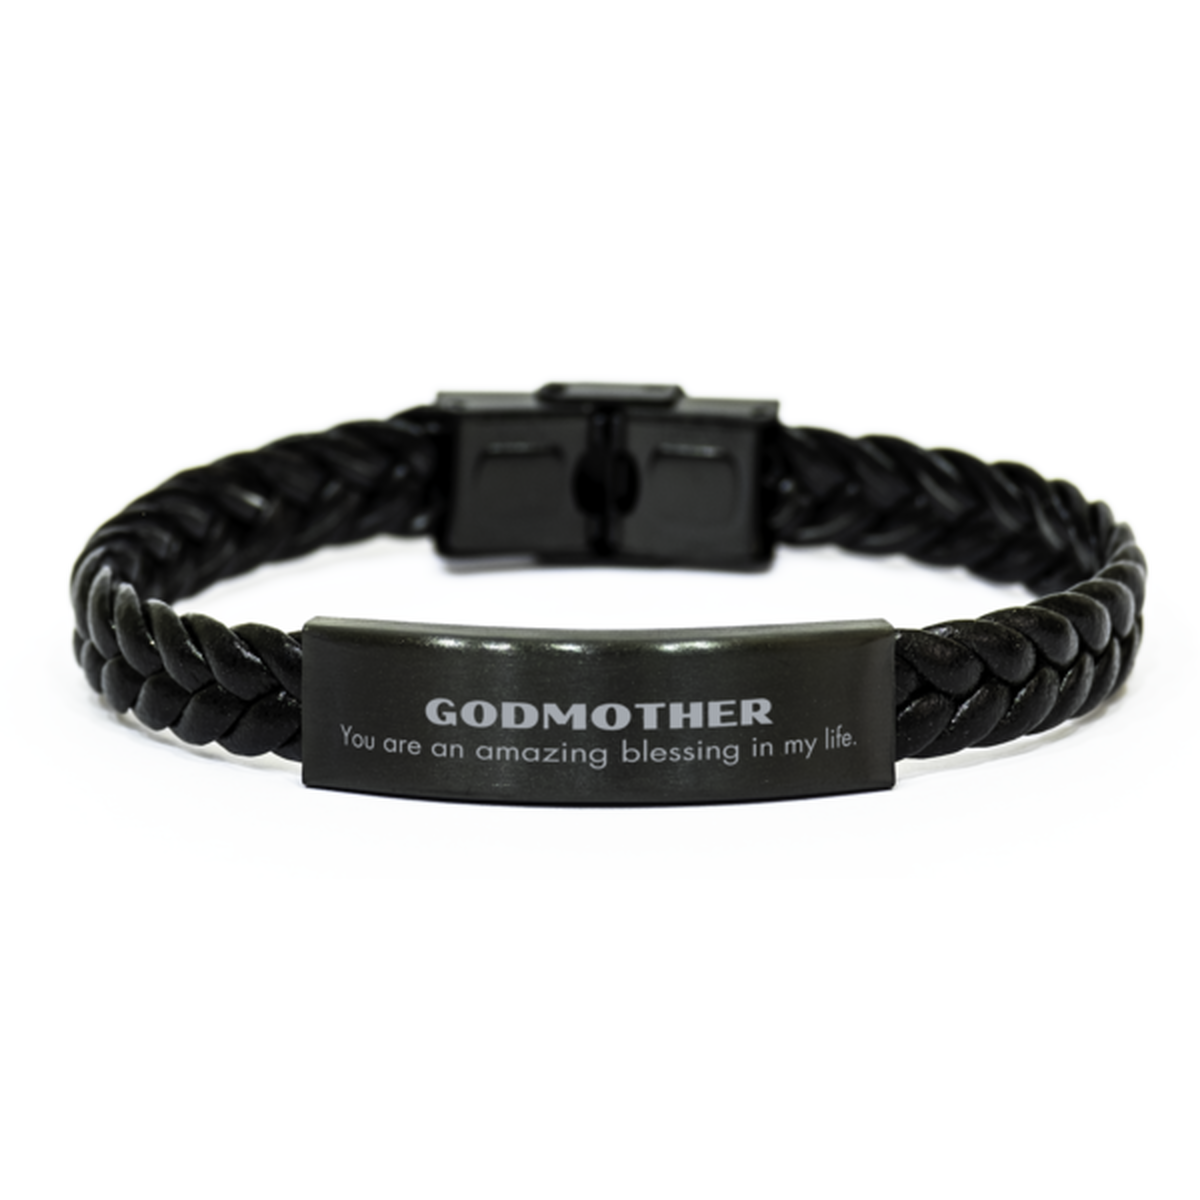 Godmother Braided Leather Bracelet, You are an amazing blessing in my life, Thank You Gifts For Godmother, Inspirational Birthday Christmas Unique Gifts For Godmother